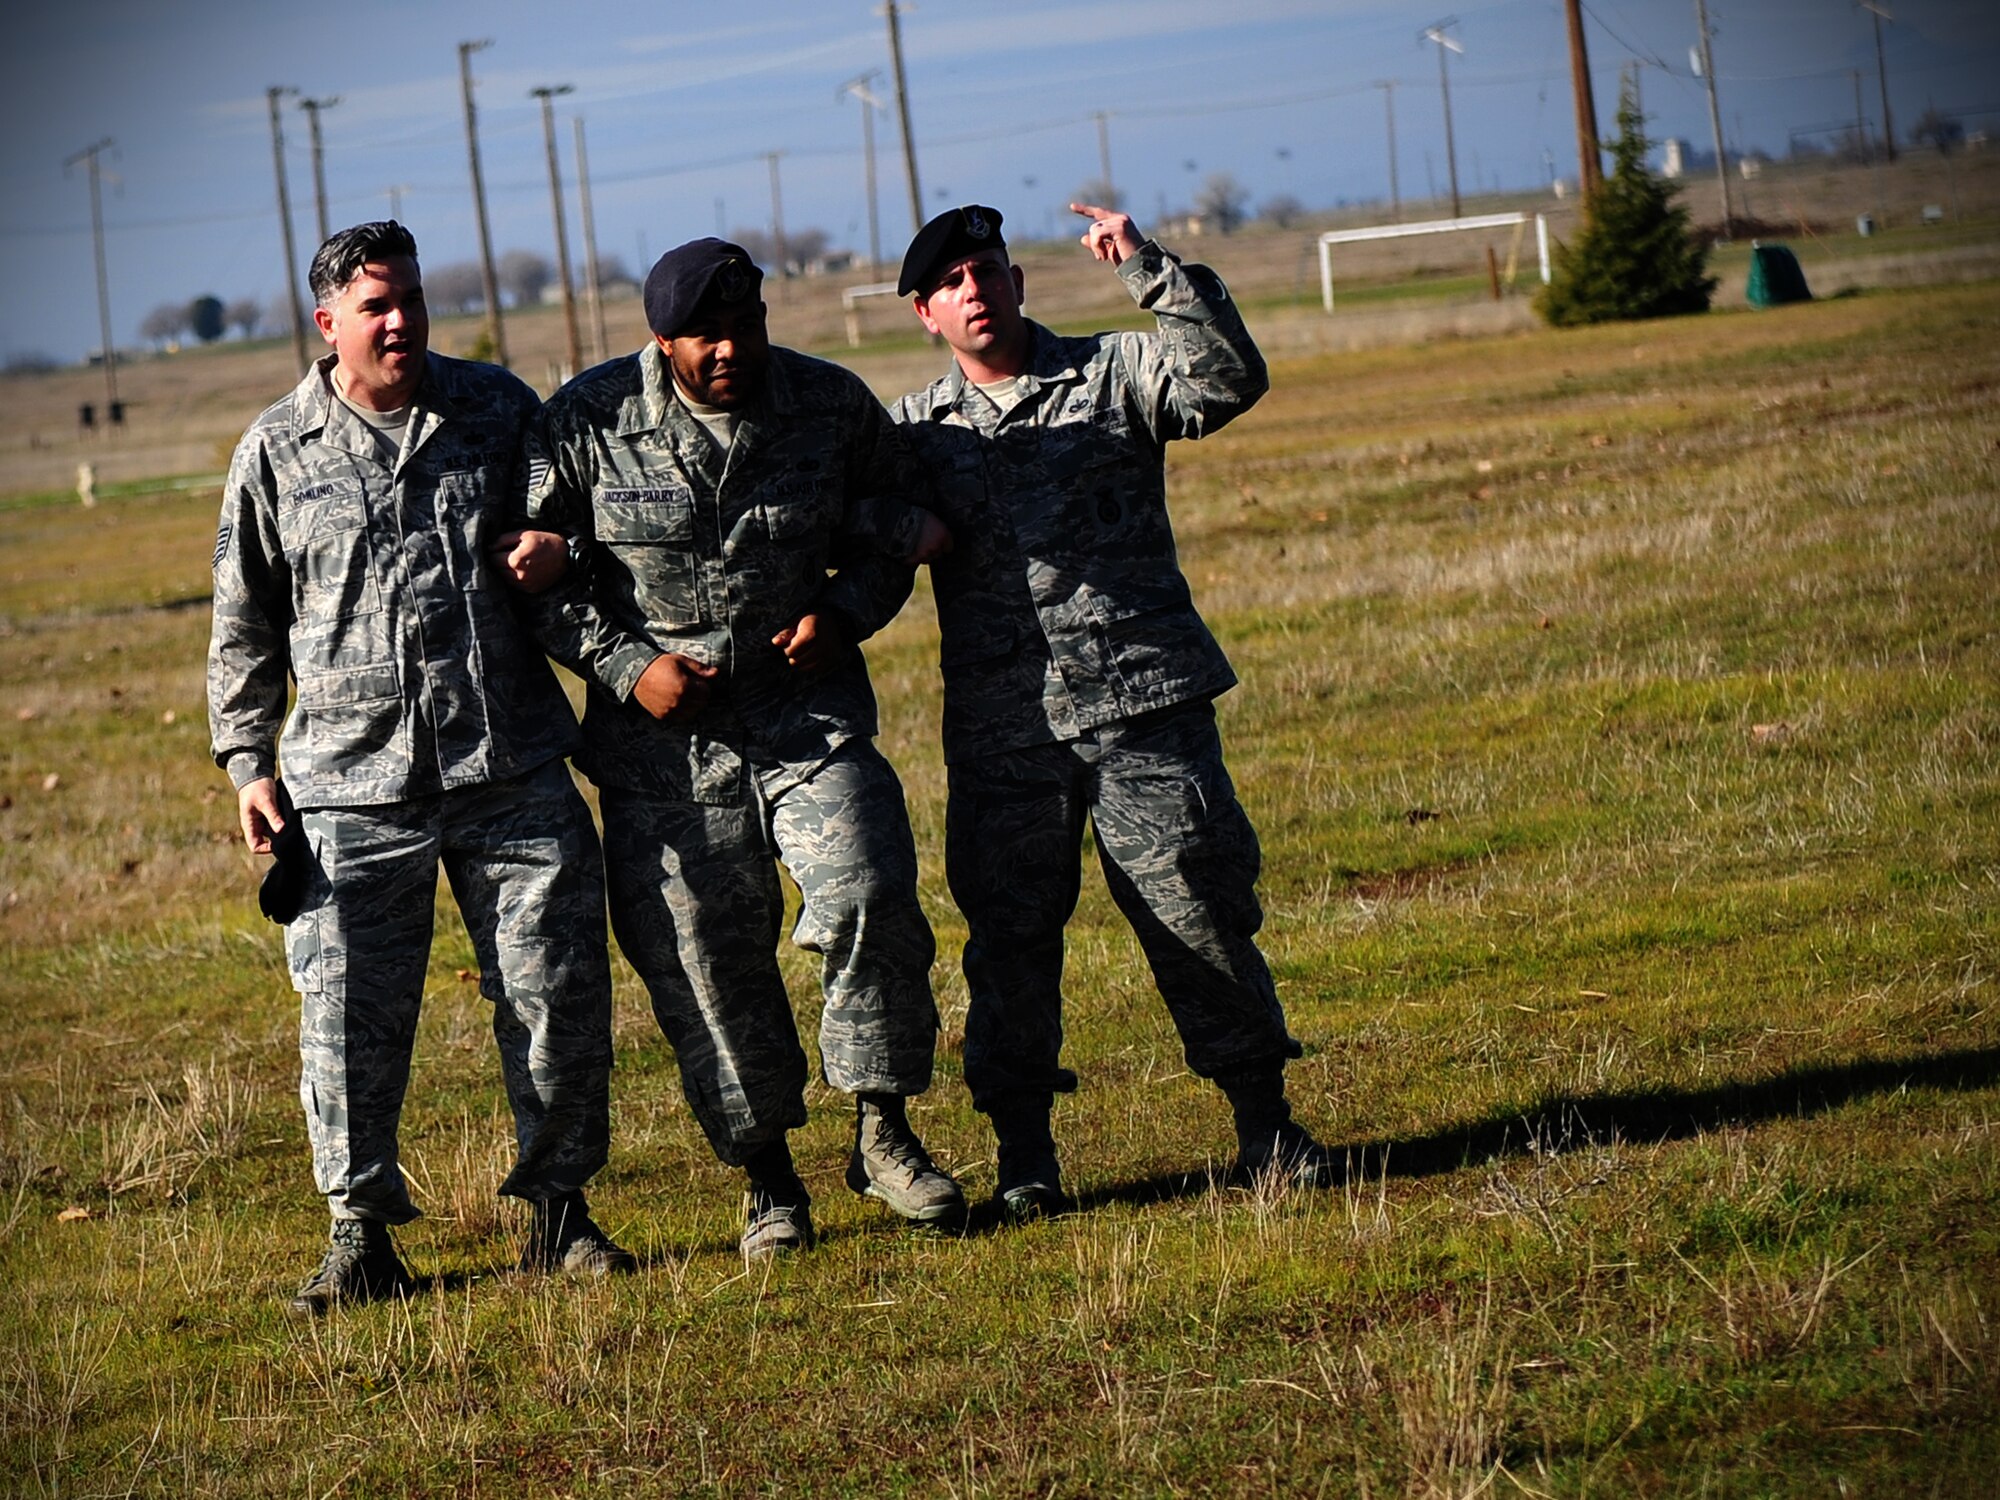 Trainers from the 9th Security Forces Squadron pretend to form a protest line during civil disturbance training at Beale Air Force Base, Calif., Jan. 25, 2013. (U.S. Air Force photo by Senior Airman Shawn Nickel/Released)